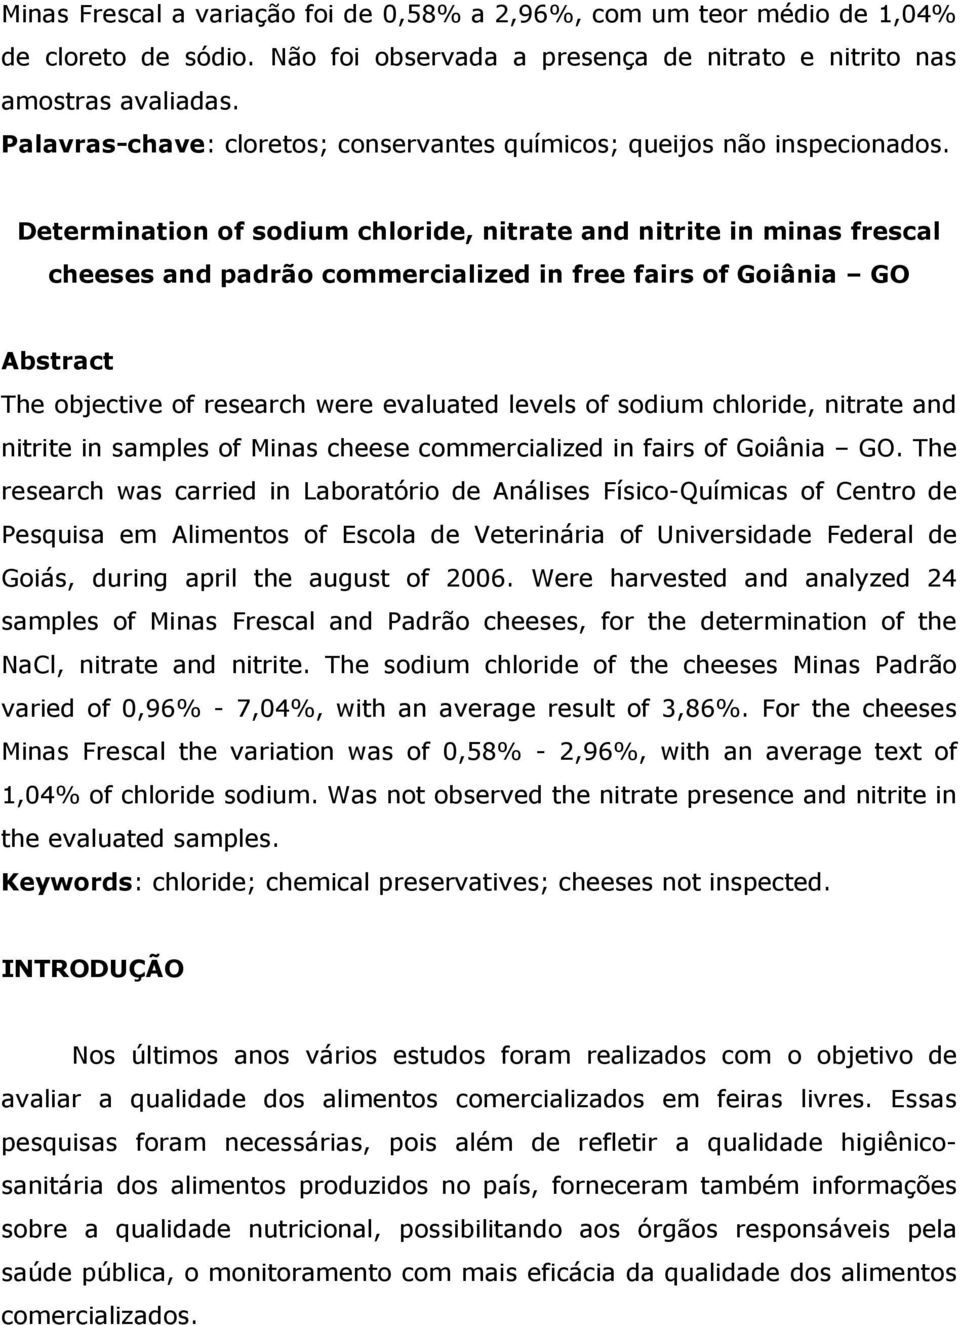 Determination of sodium chloride, nitrate and nitrite in minas frescal cheeses and padrão commercialized in free fairs of Goiânia GO Abstract The objective of research were evaluated levels of sodium